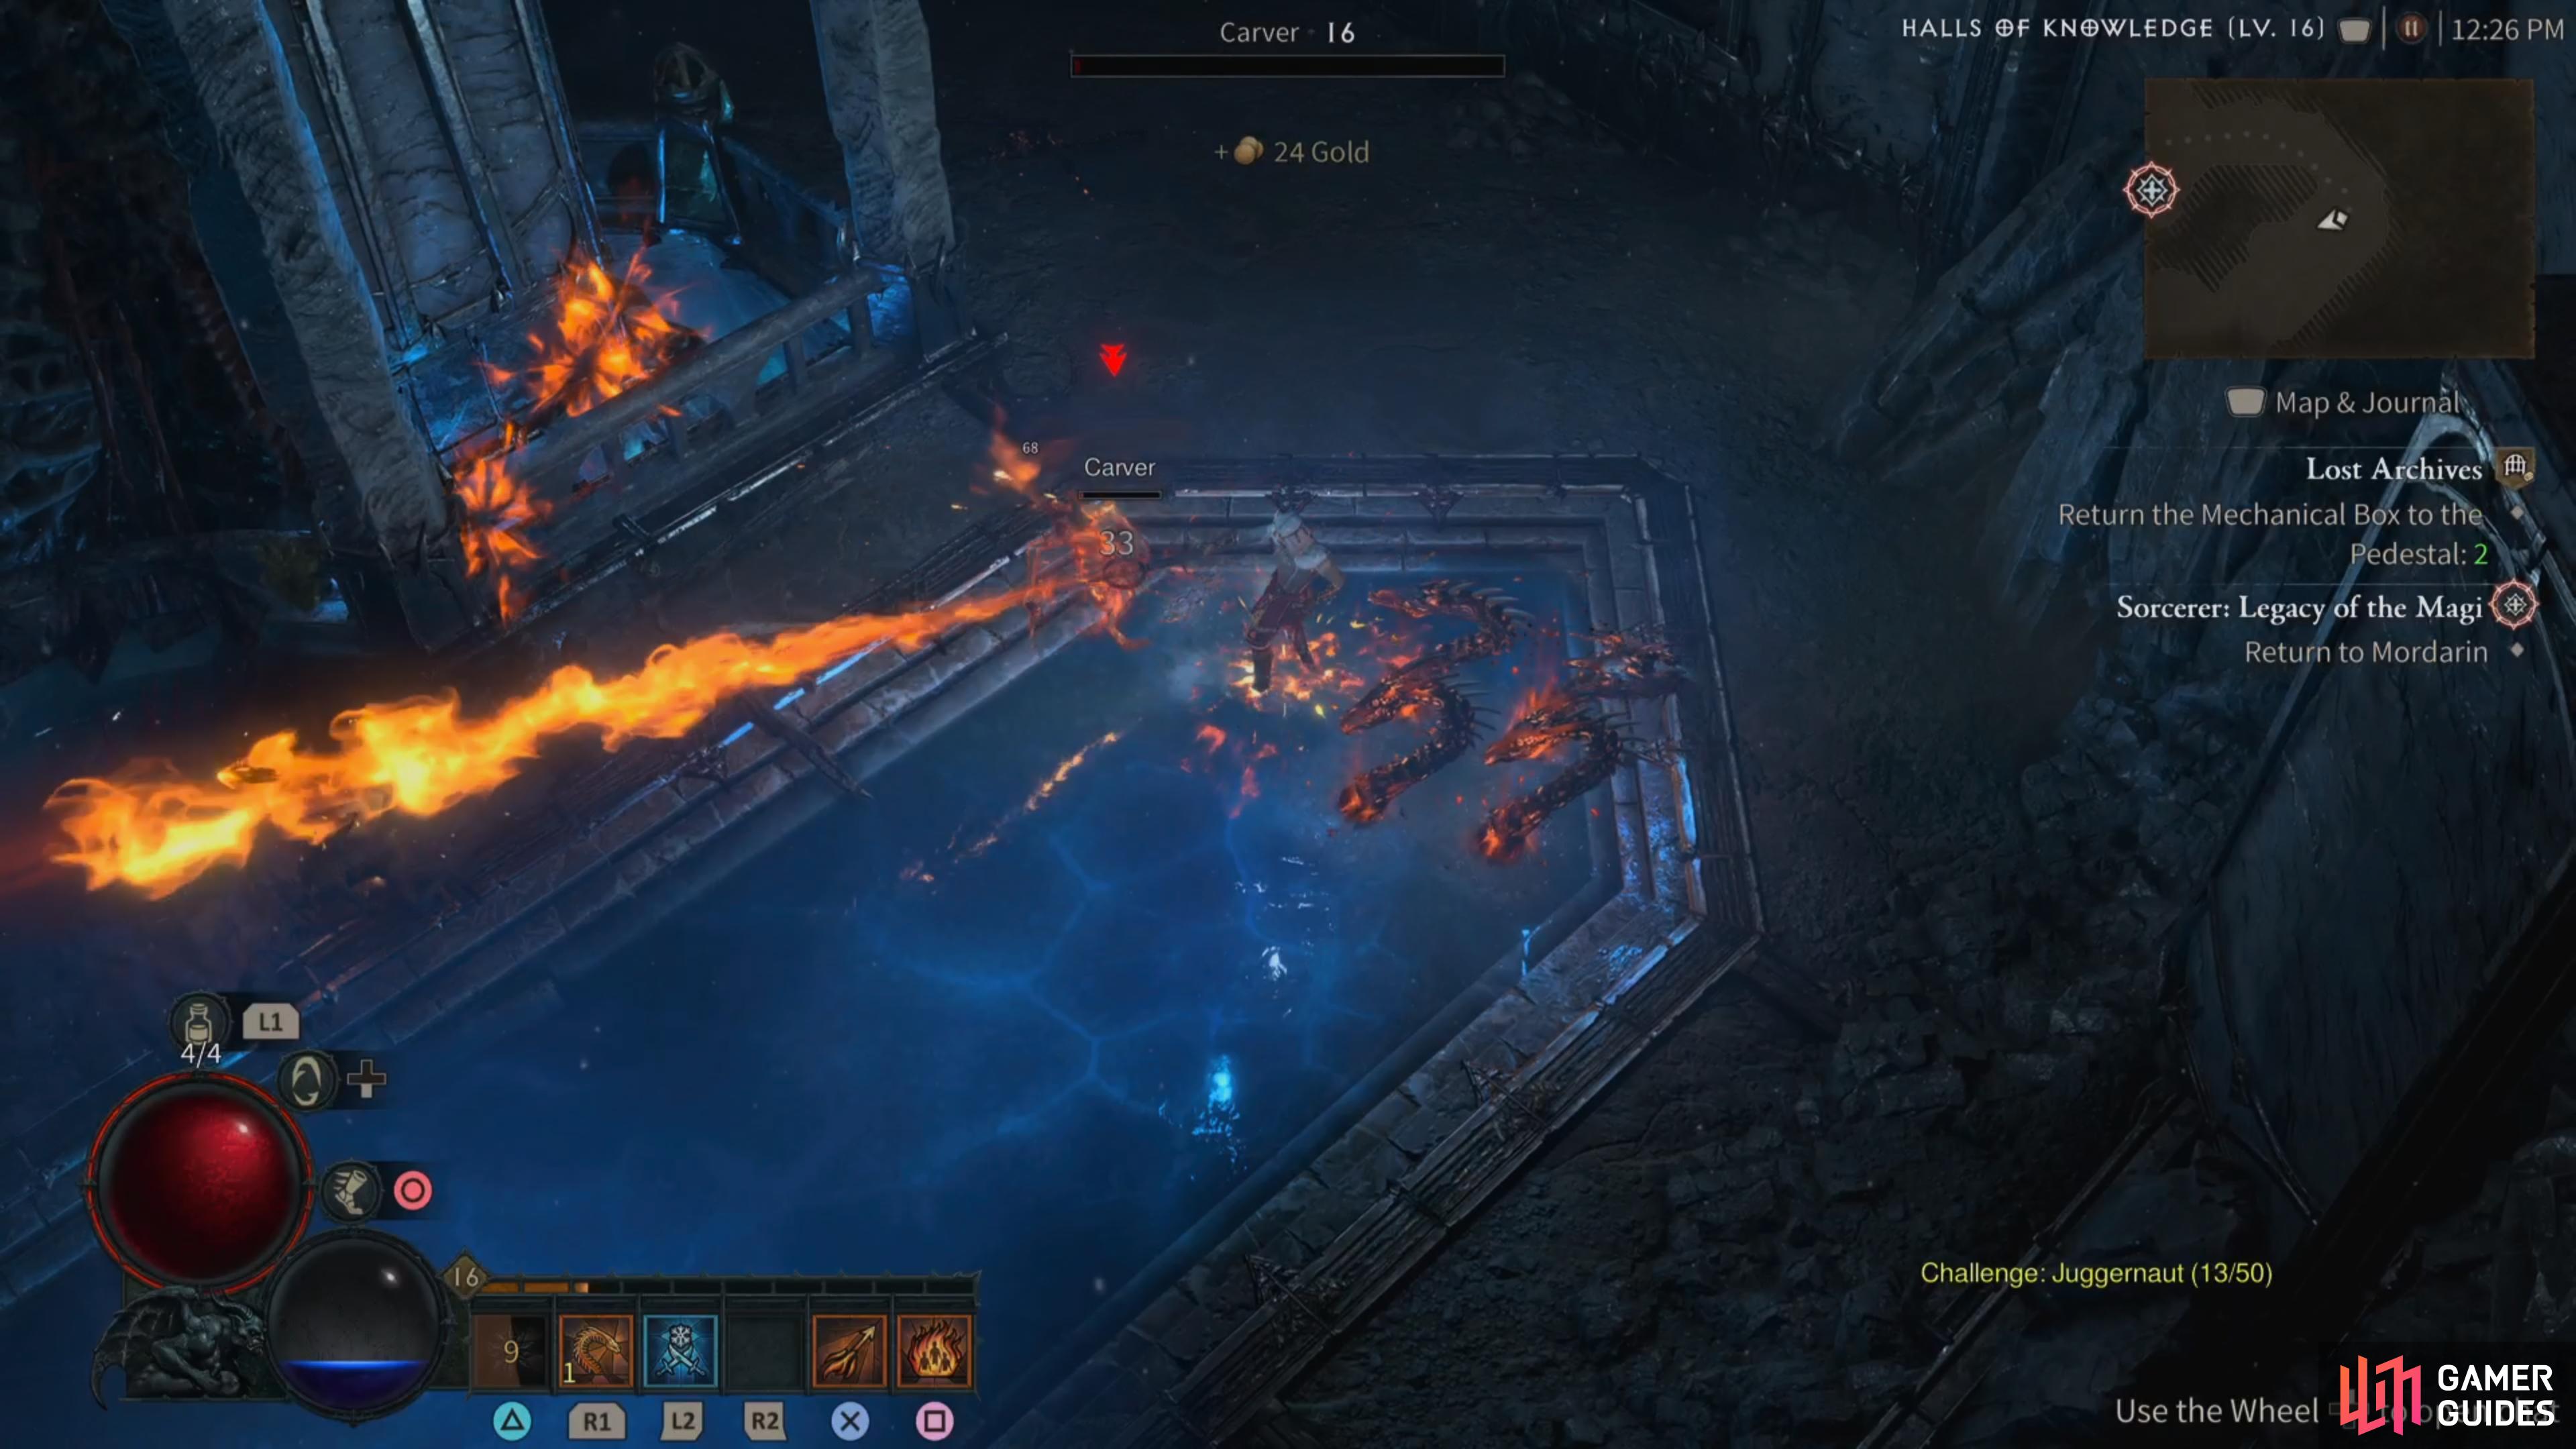 A Hydra build is the most powerful early build in Diablo 4.